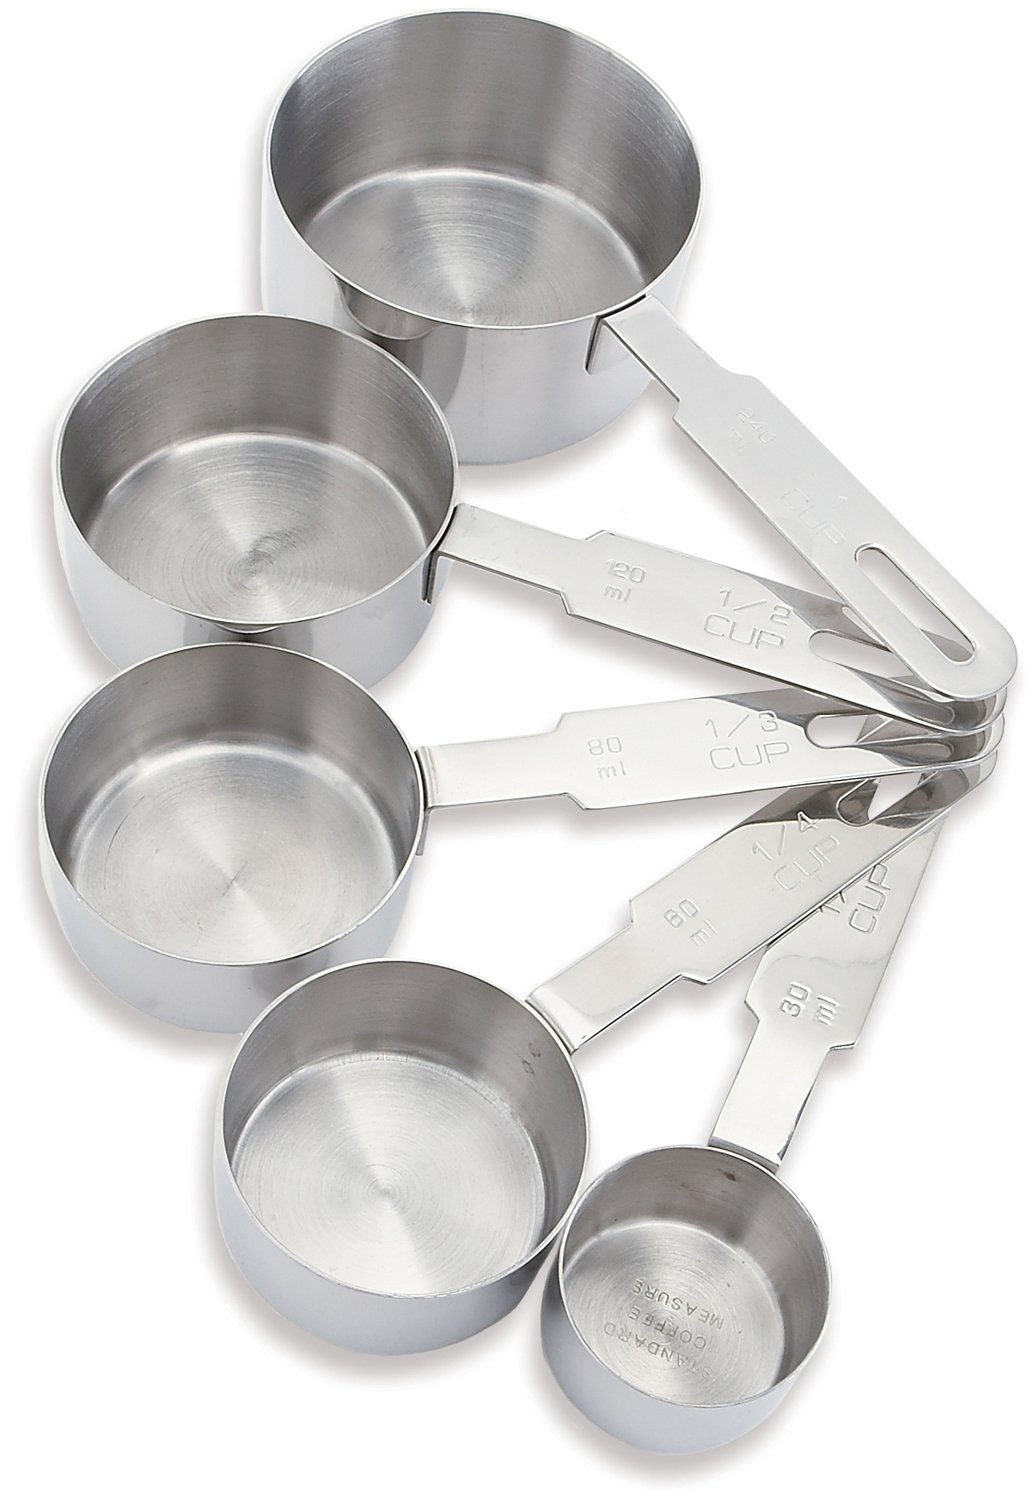 liquid and dry measuring cups